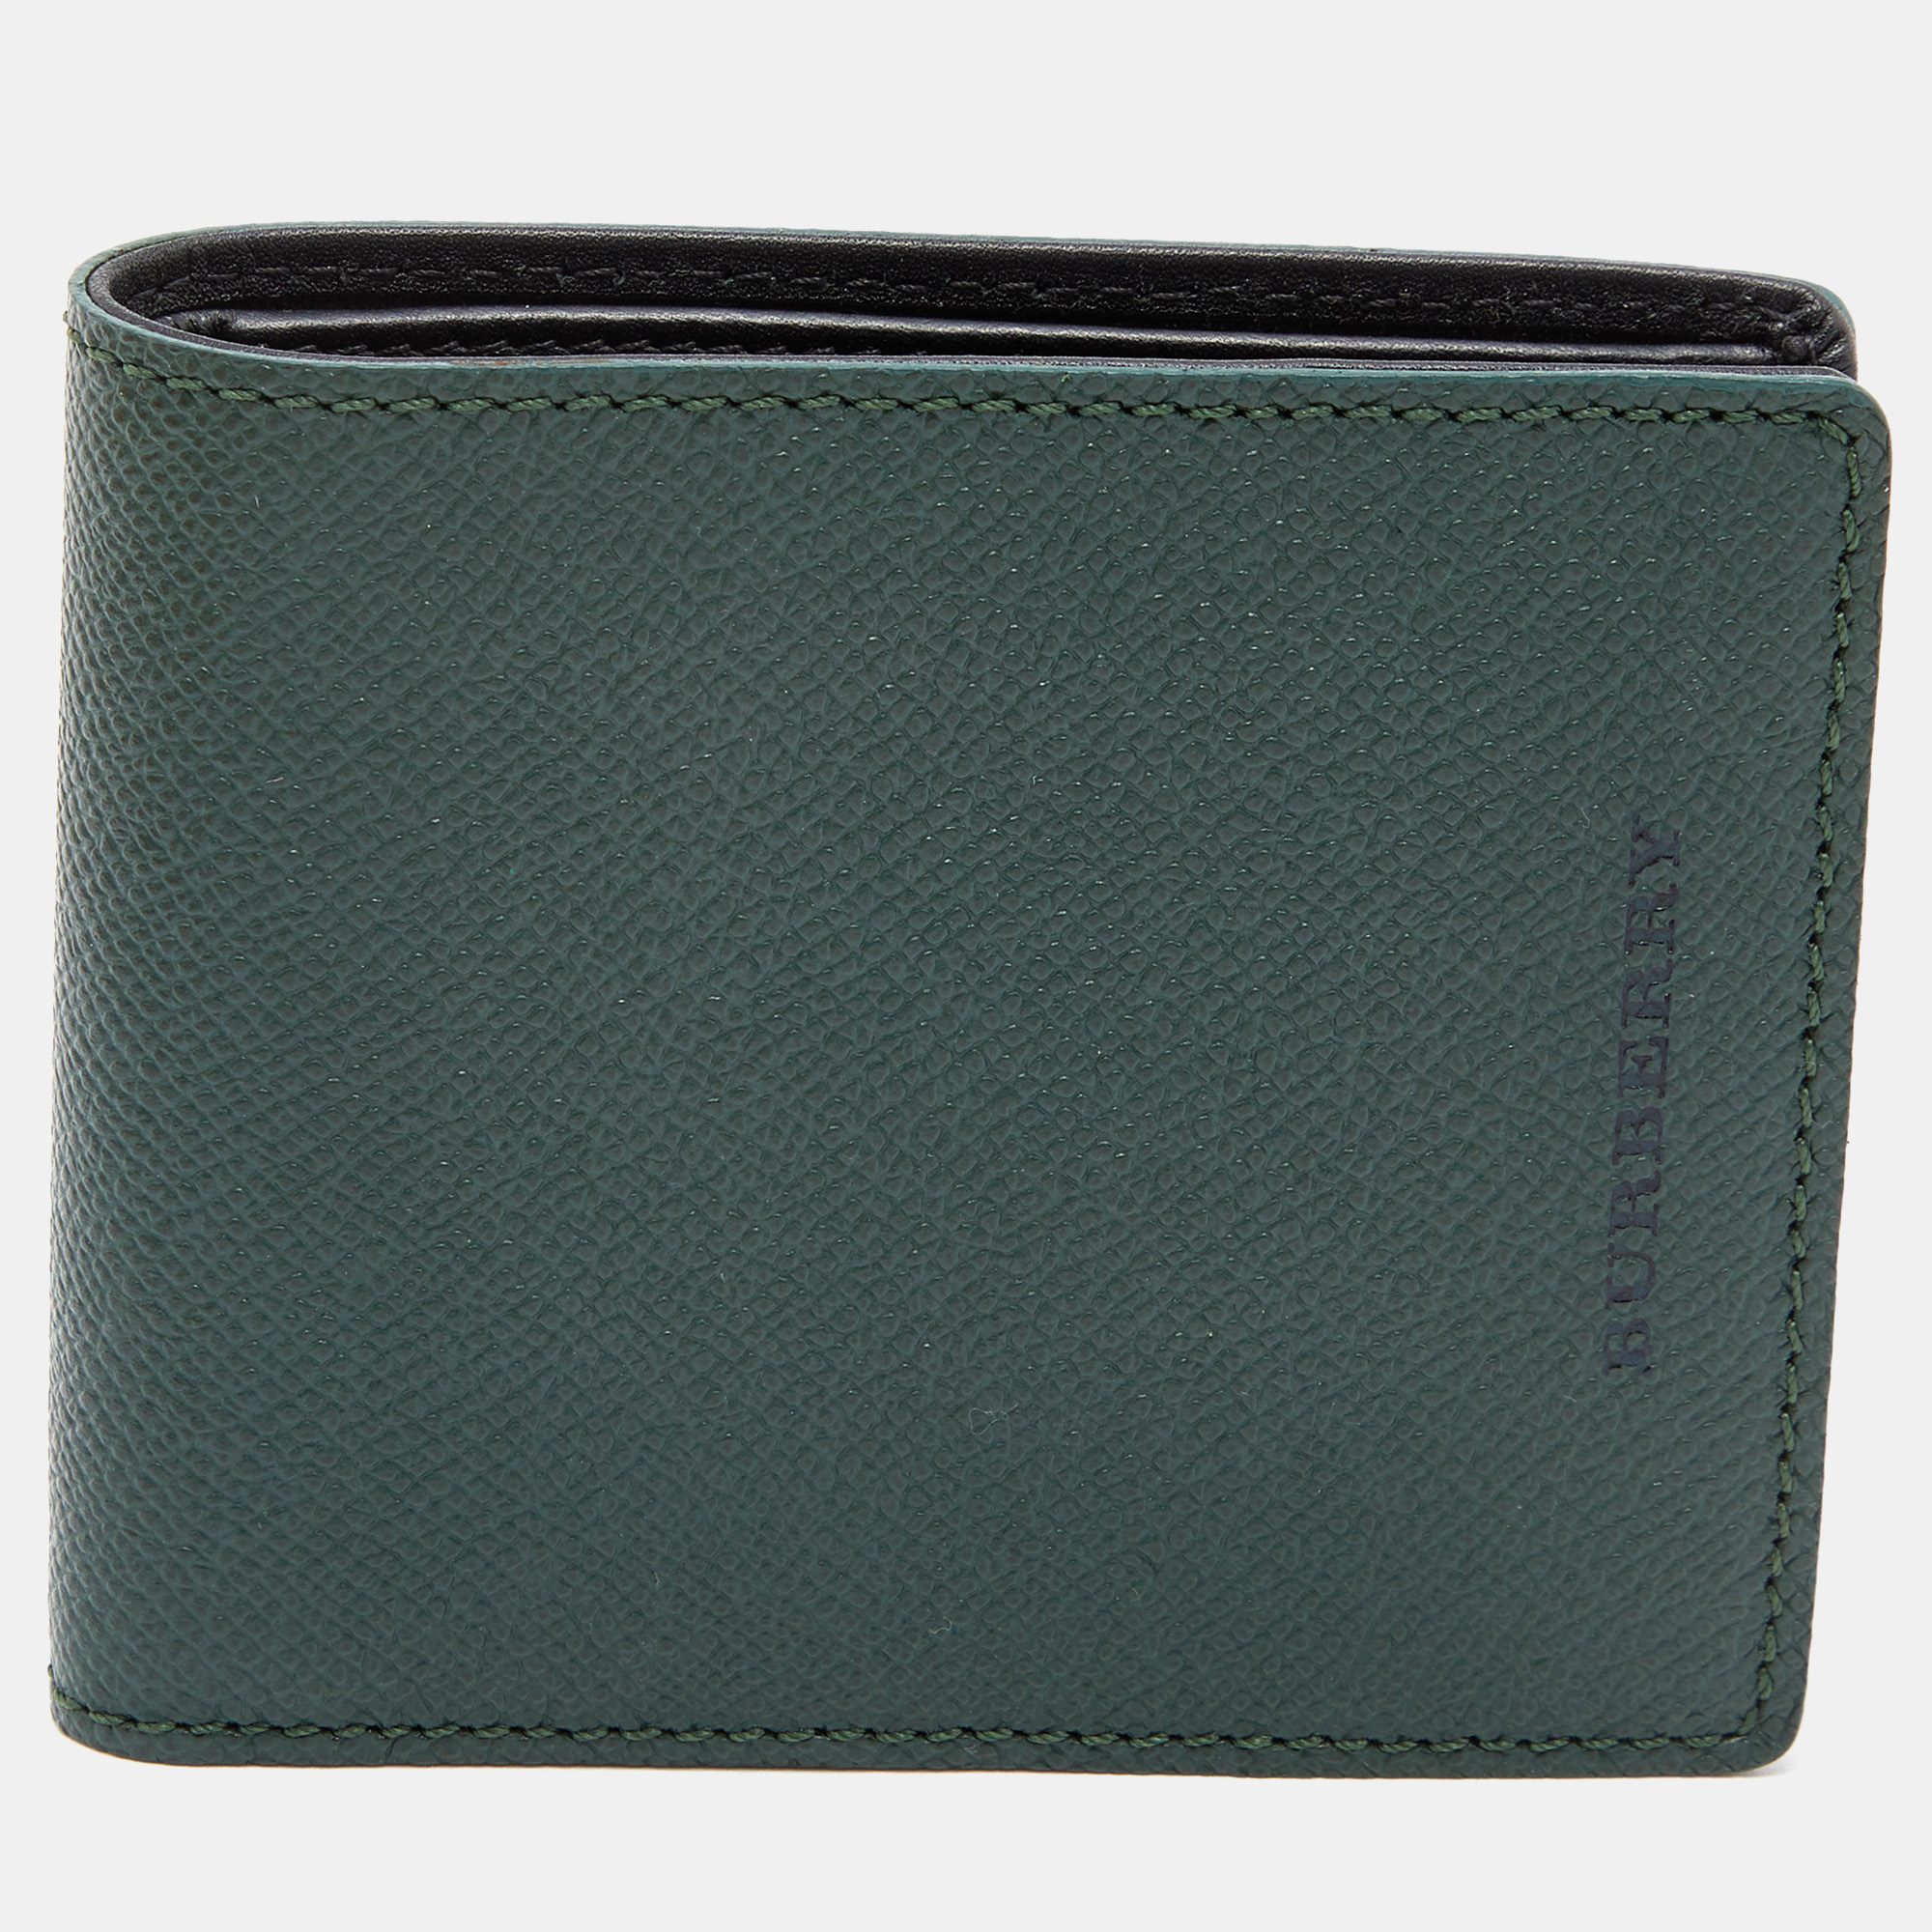 Pre-owned Burberry Dark Green Leather Bifold Wallet